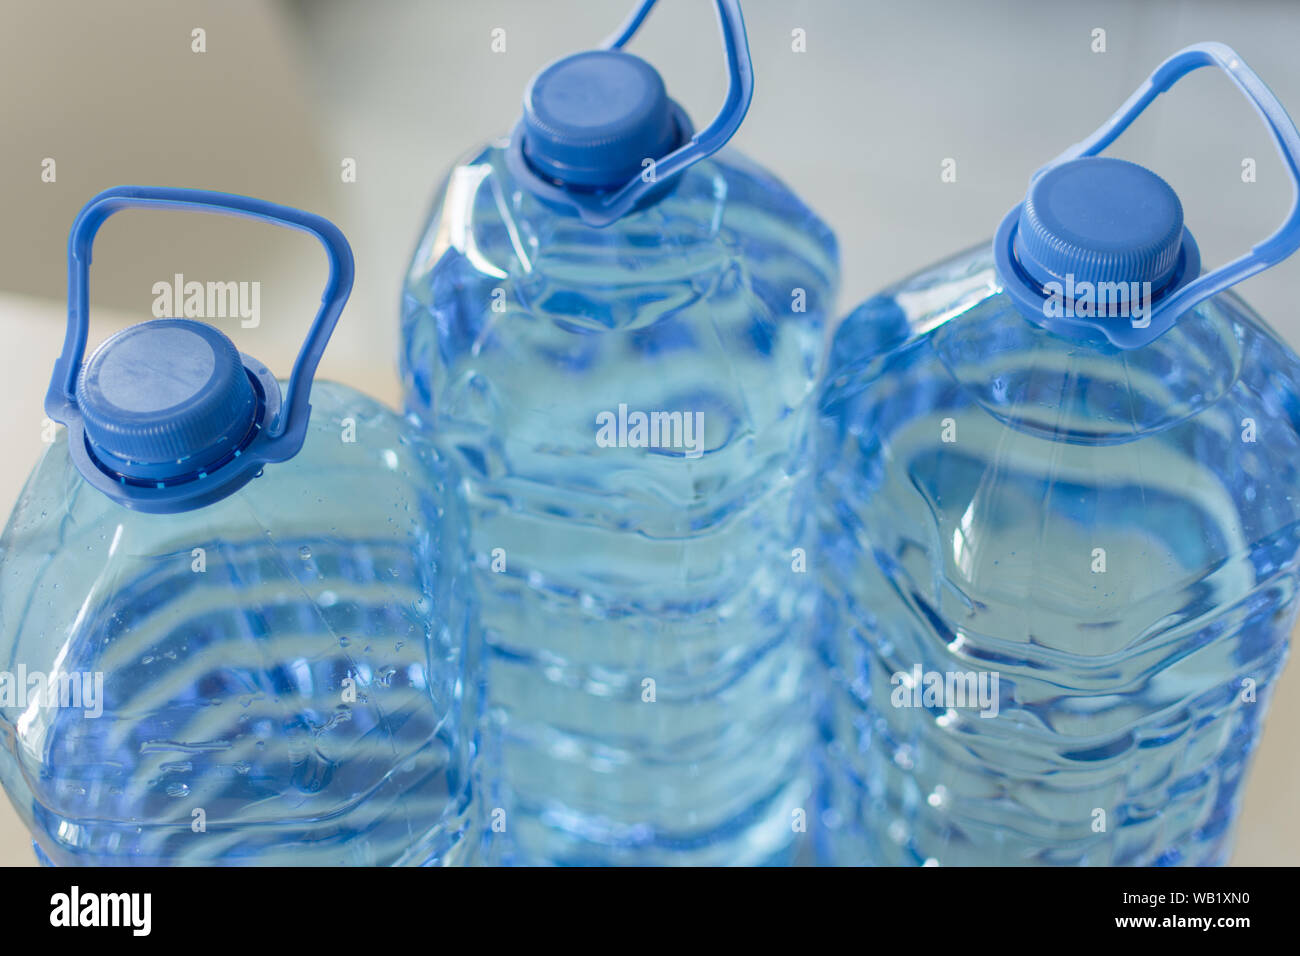 https://c8.alamy.com/comp/WB1XN0/big-plastic-bottle-with-water-on-the-table-over-bright-kitchen-backgroung-bottle-of-clear-transarent-water-in-a-blue-color-cap-and-handle-closeup-WB1XN0.jpg